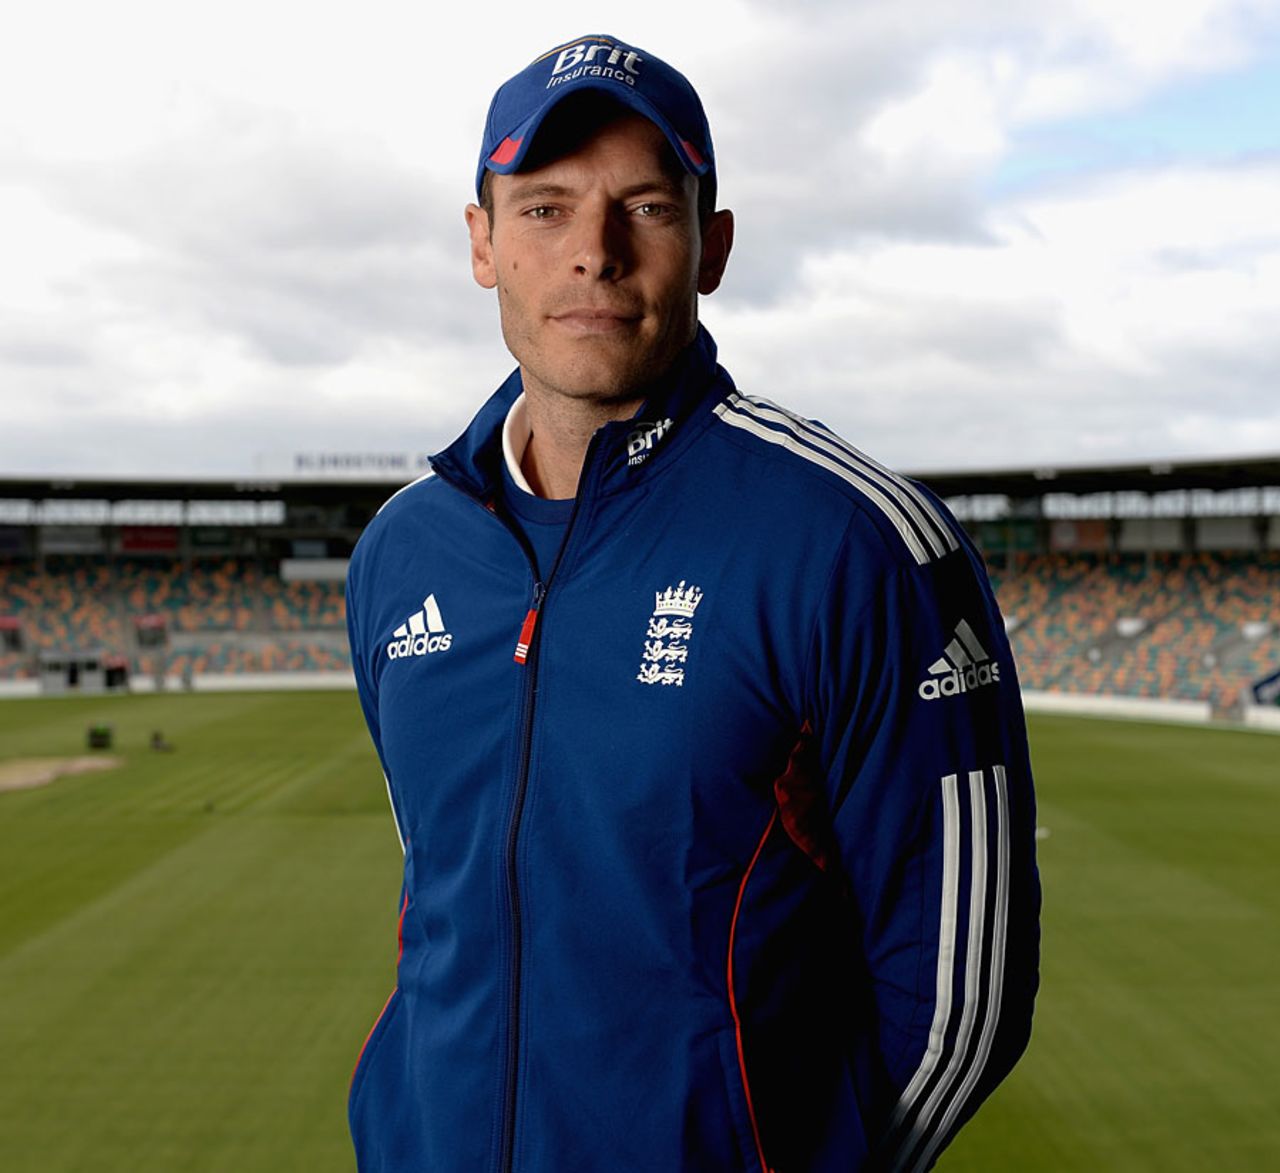 Chris Tremlett, vying for a place in the first Ashes Test, poses in Hobart, November 4, 2013